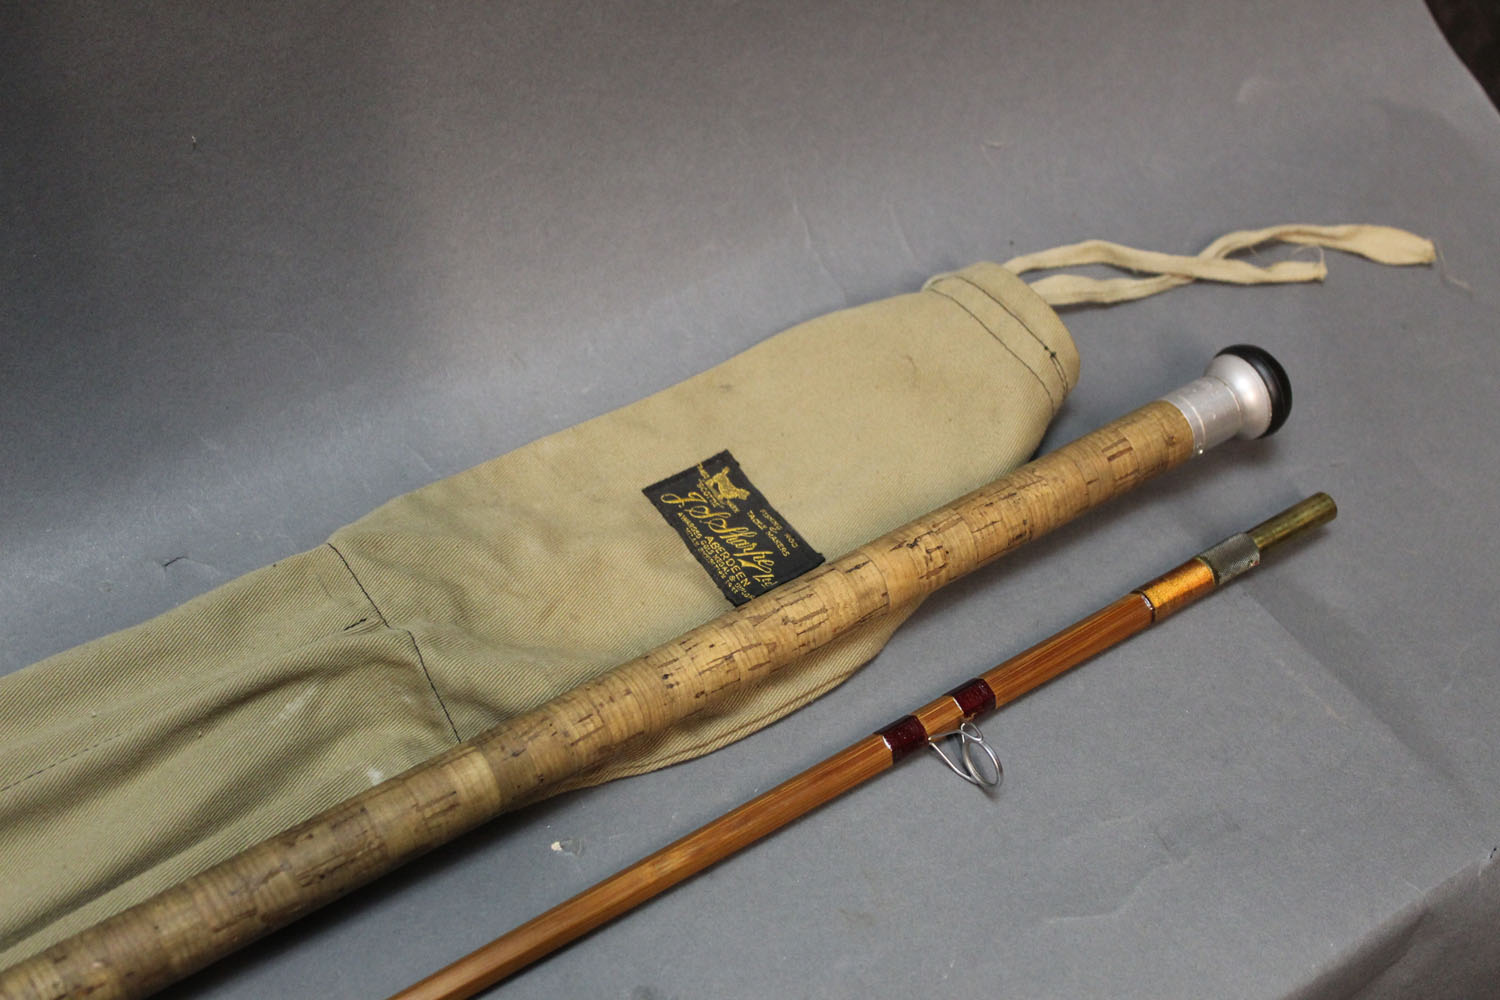 Sharpes of Aberdeen, a split cane spinning rod titled "The J S Sharpe", in two sections, 9' 3".